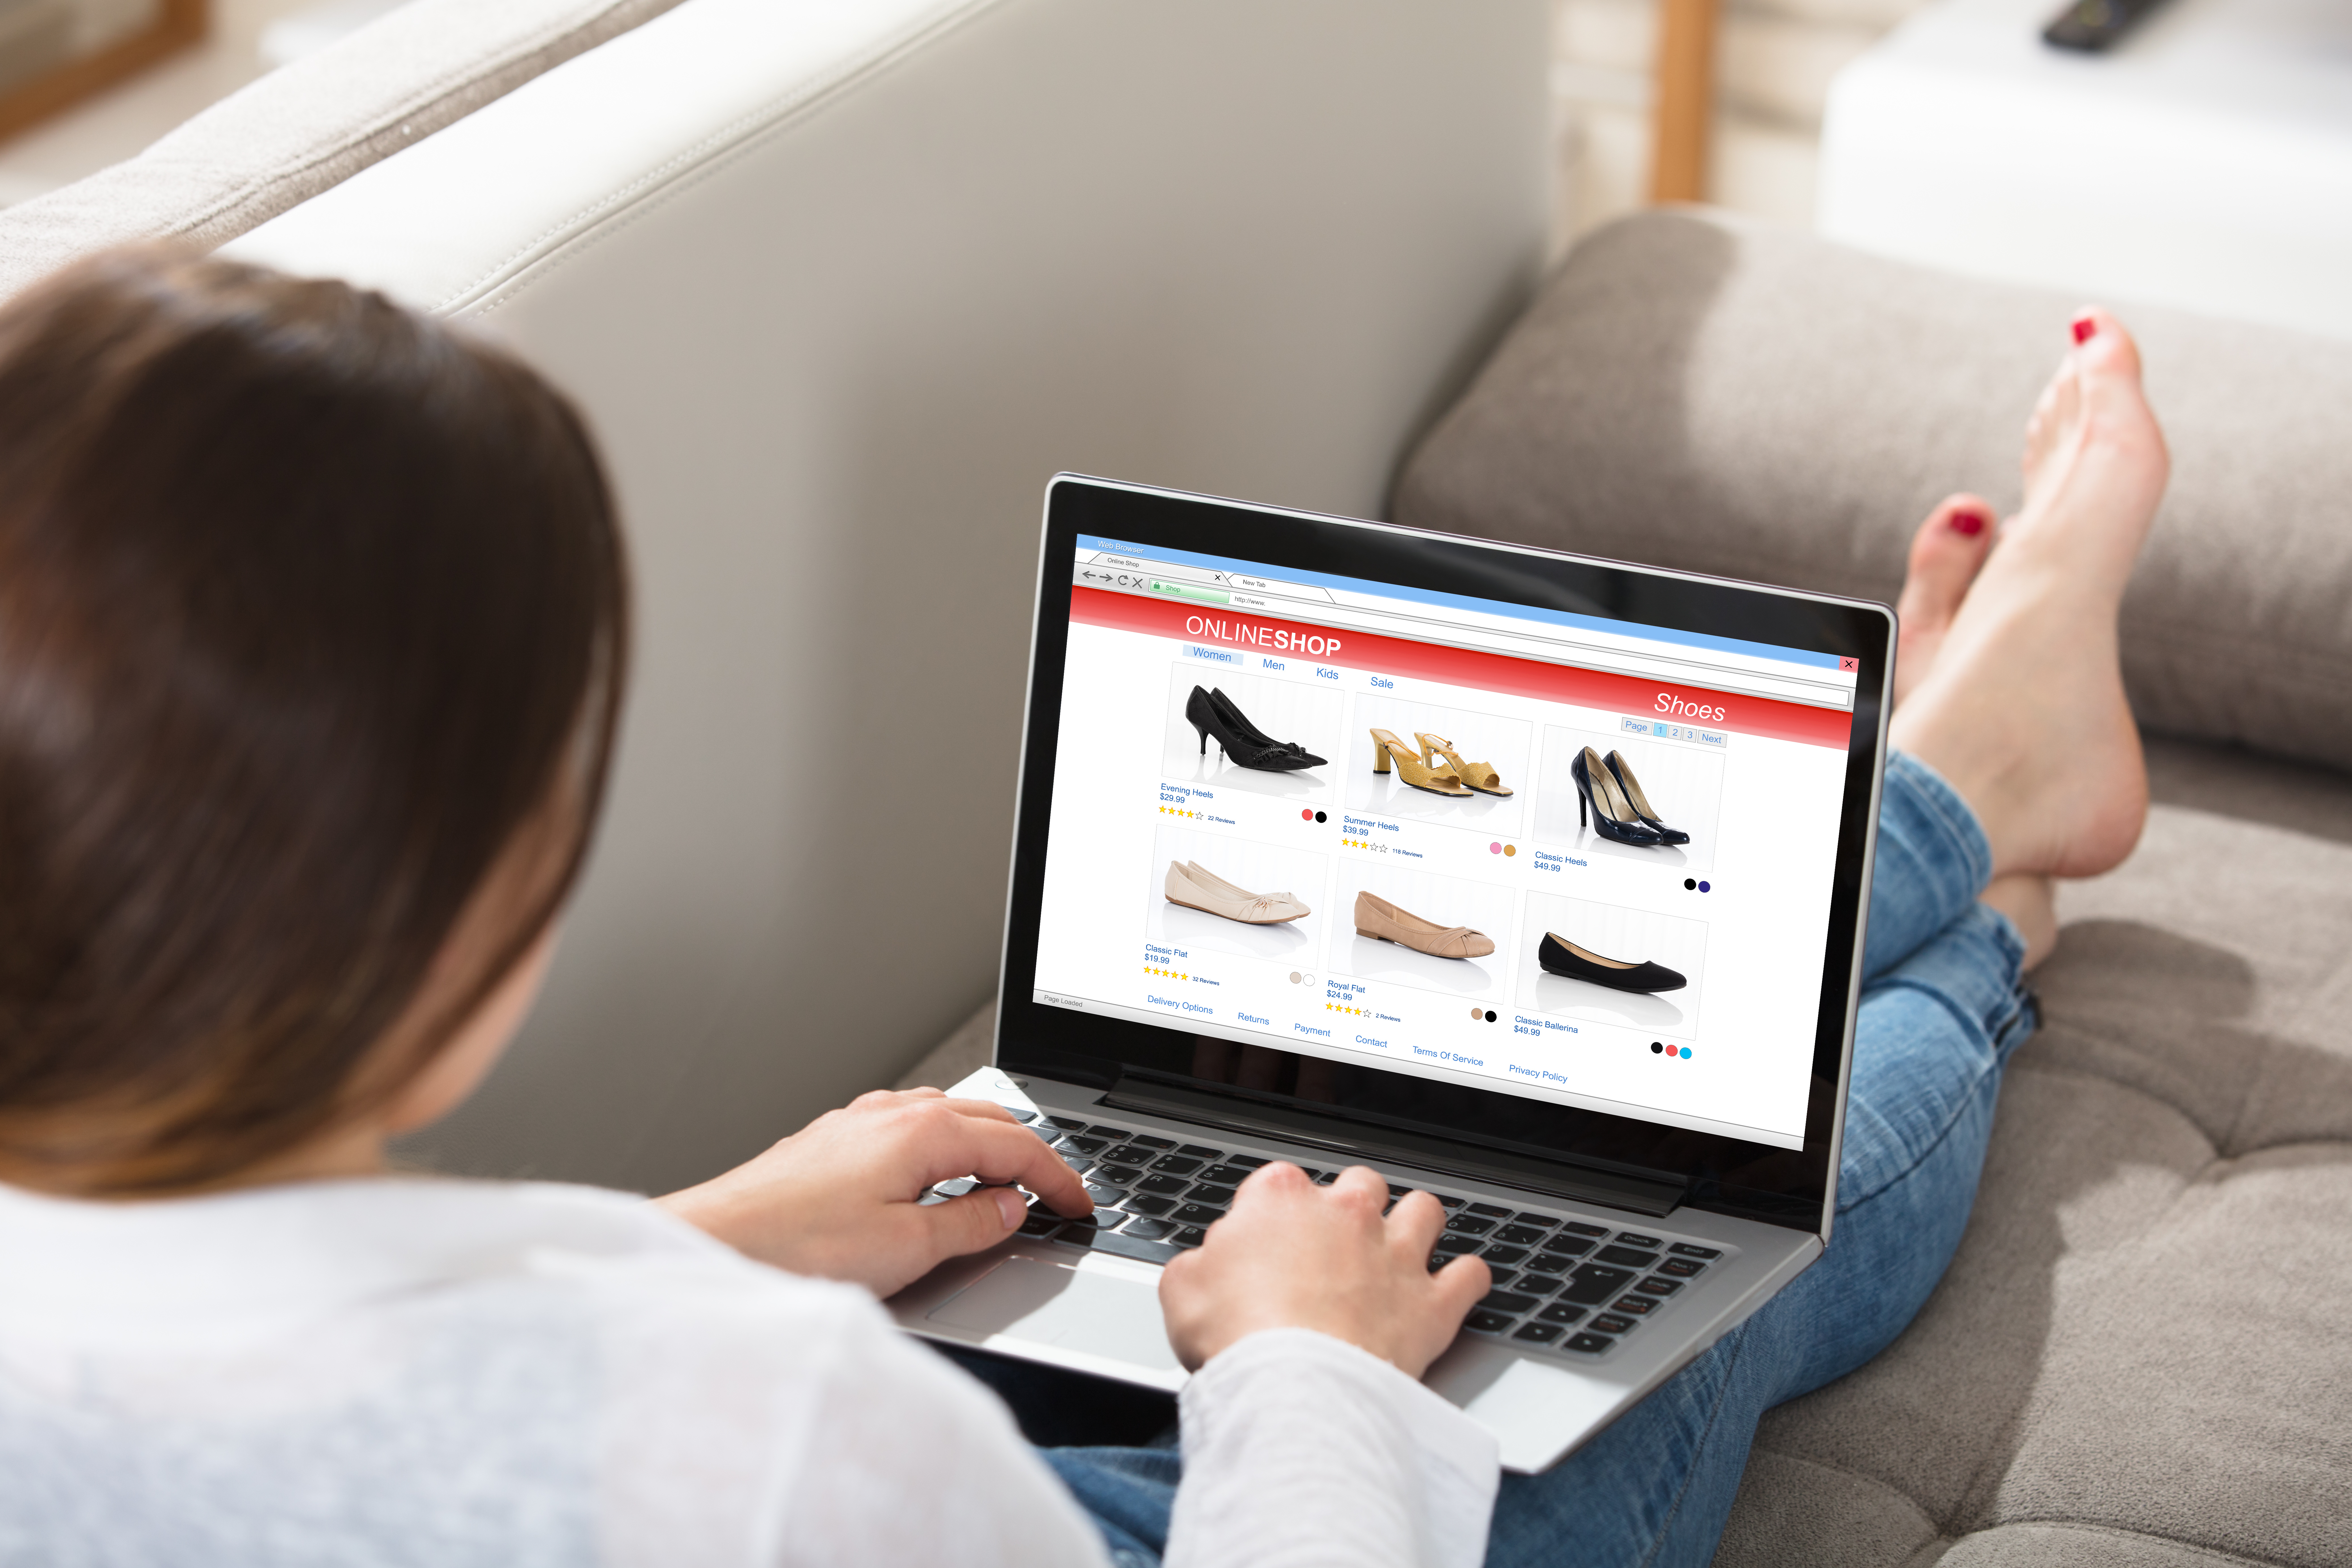 Girl from Europe buying shoes on a US based eCommerce site with international shipping options